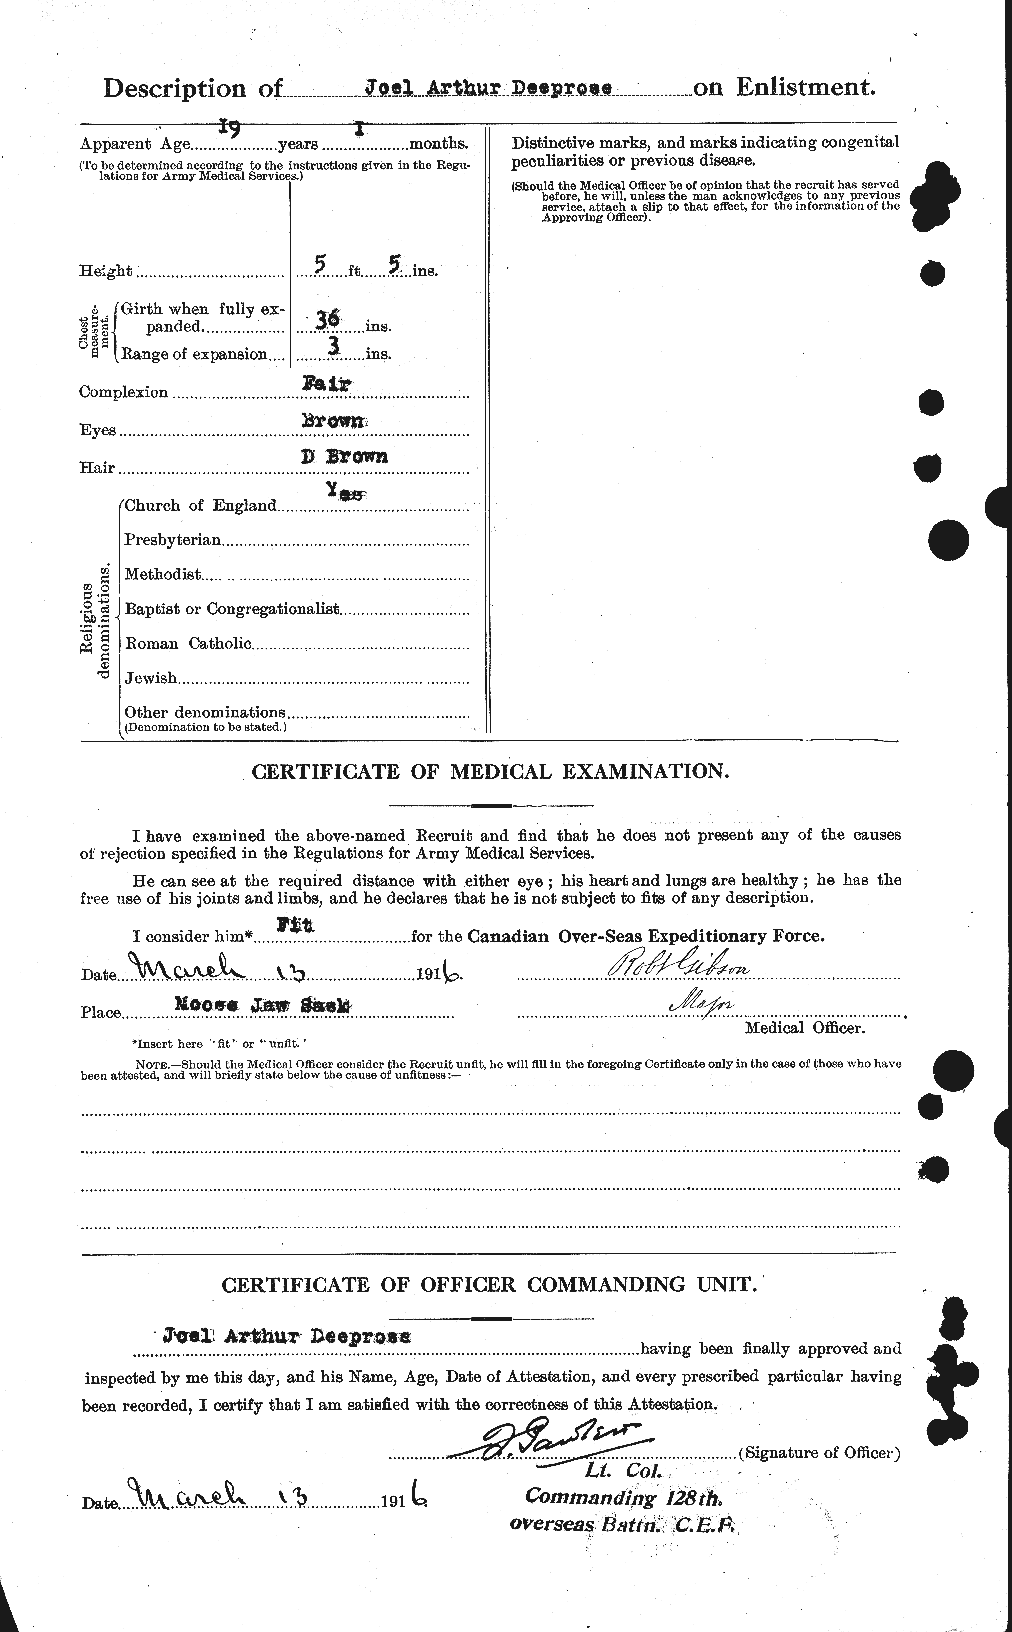 Personnel Records of the First World War - CEF 285797b